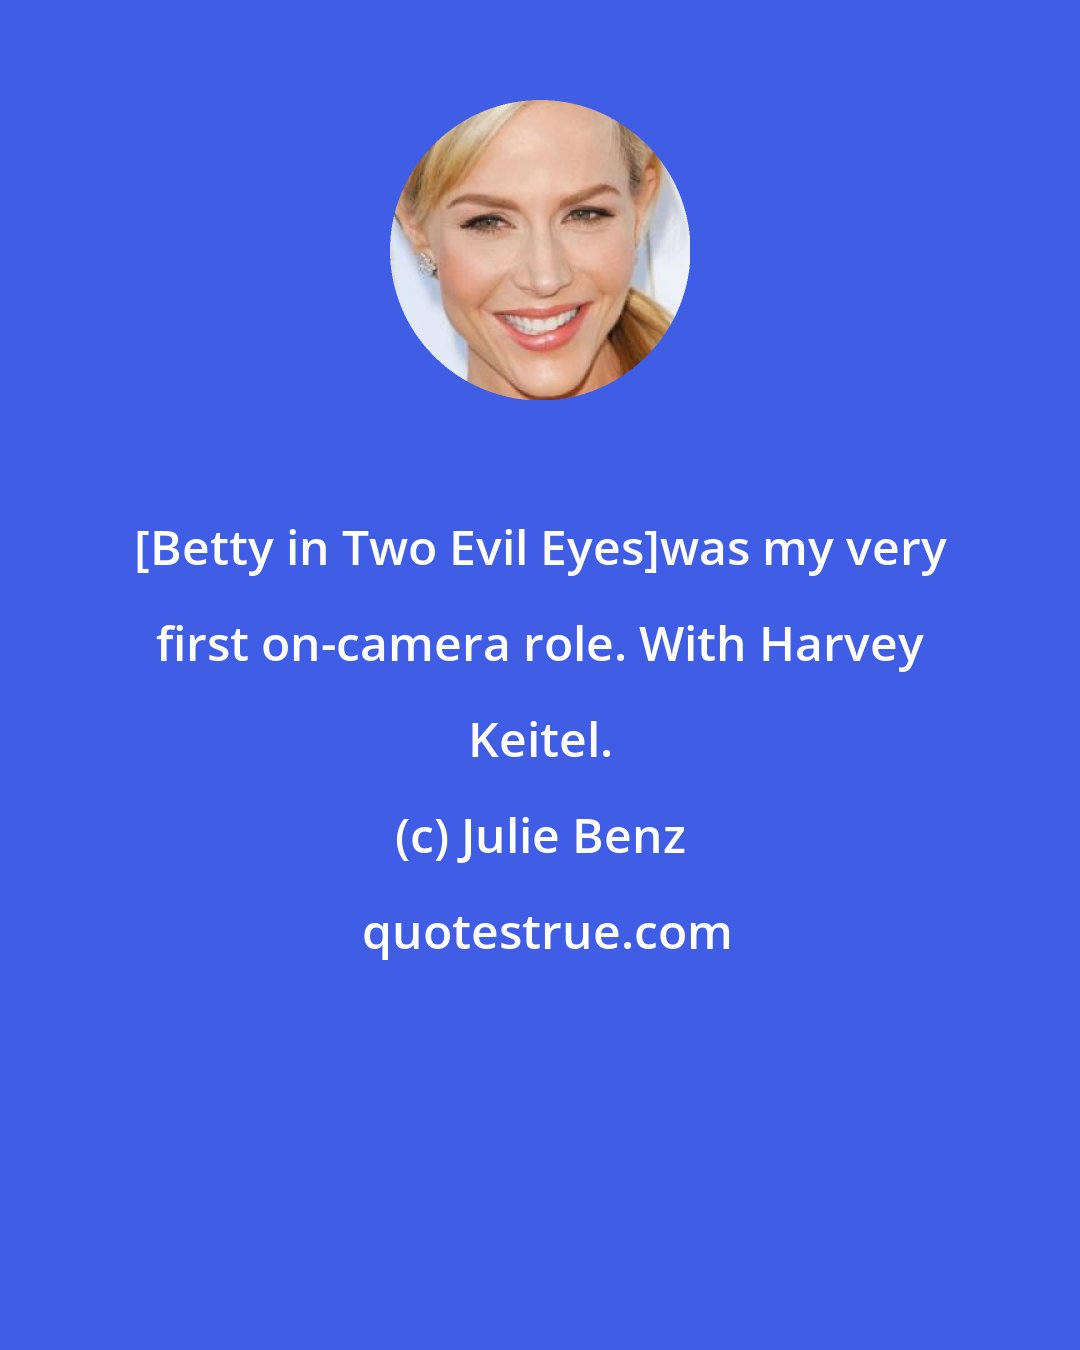 Julie Benz: [Betty in Two Evil Eyes]was my very first on-camera role. With Harvey Keitel.